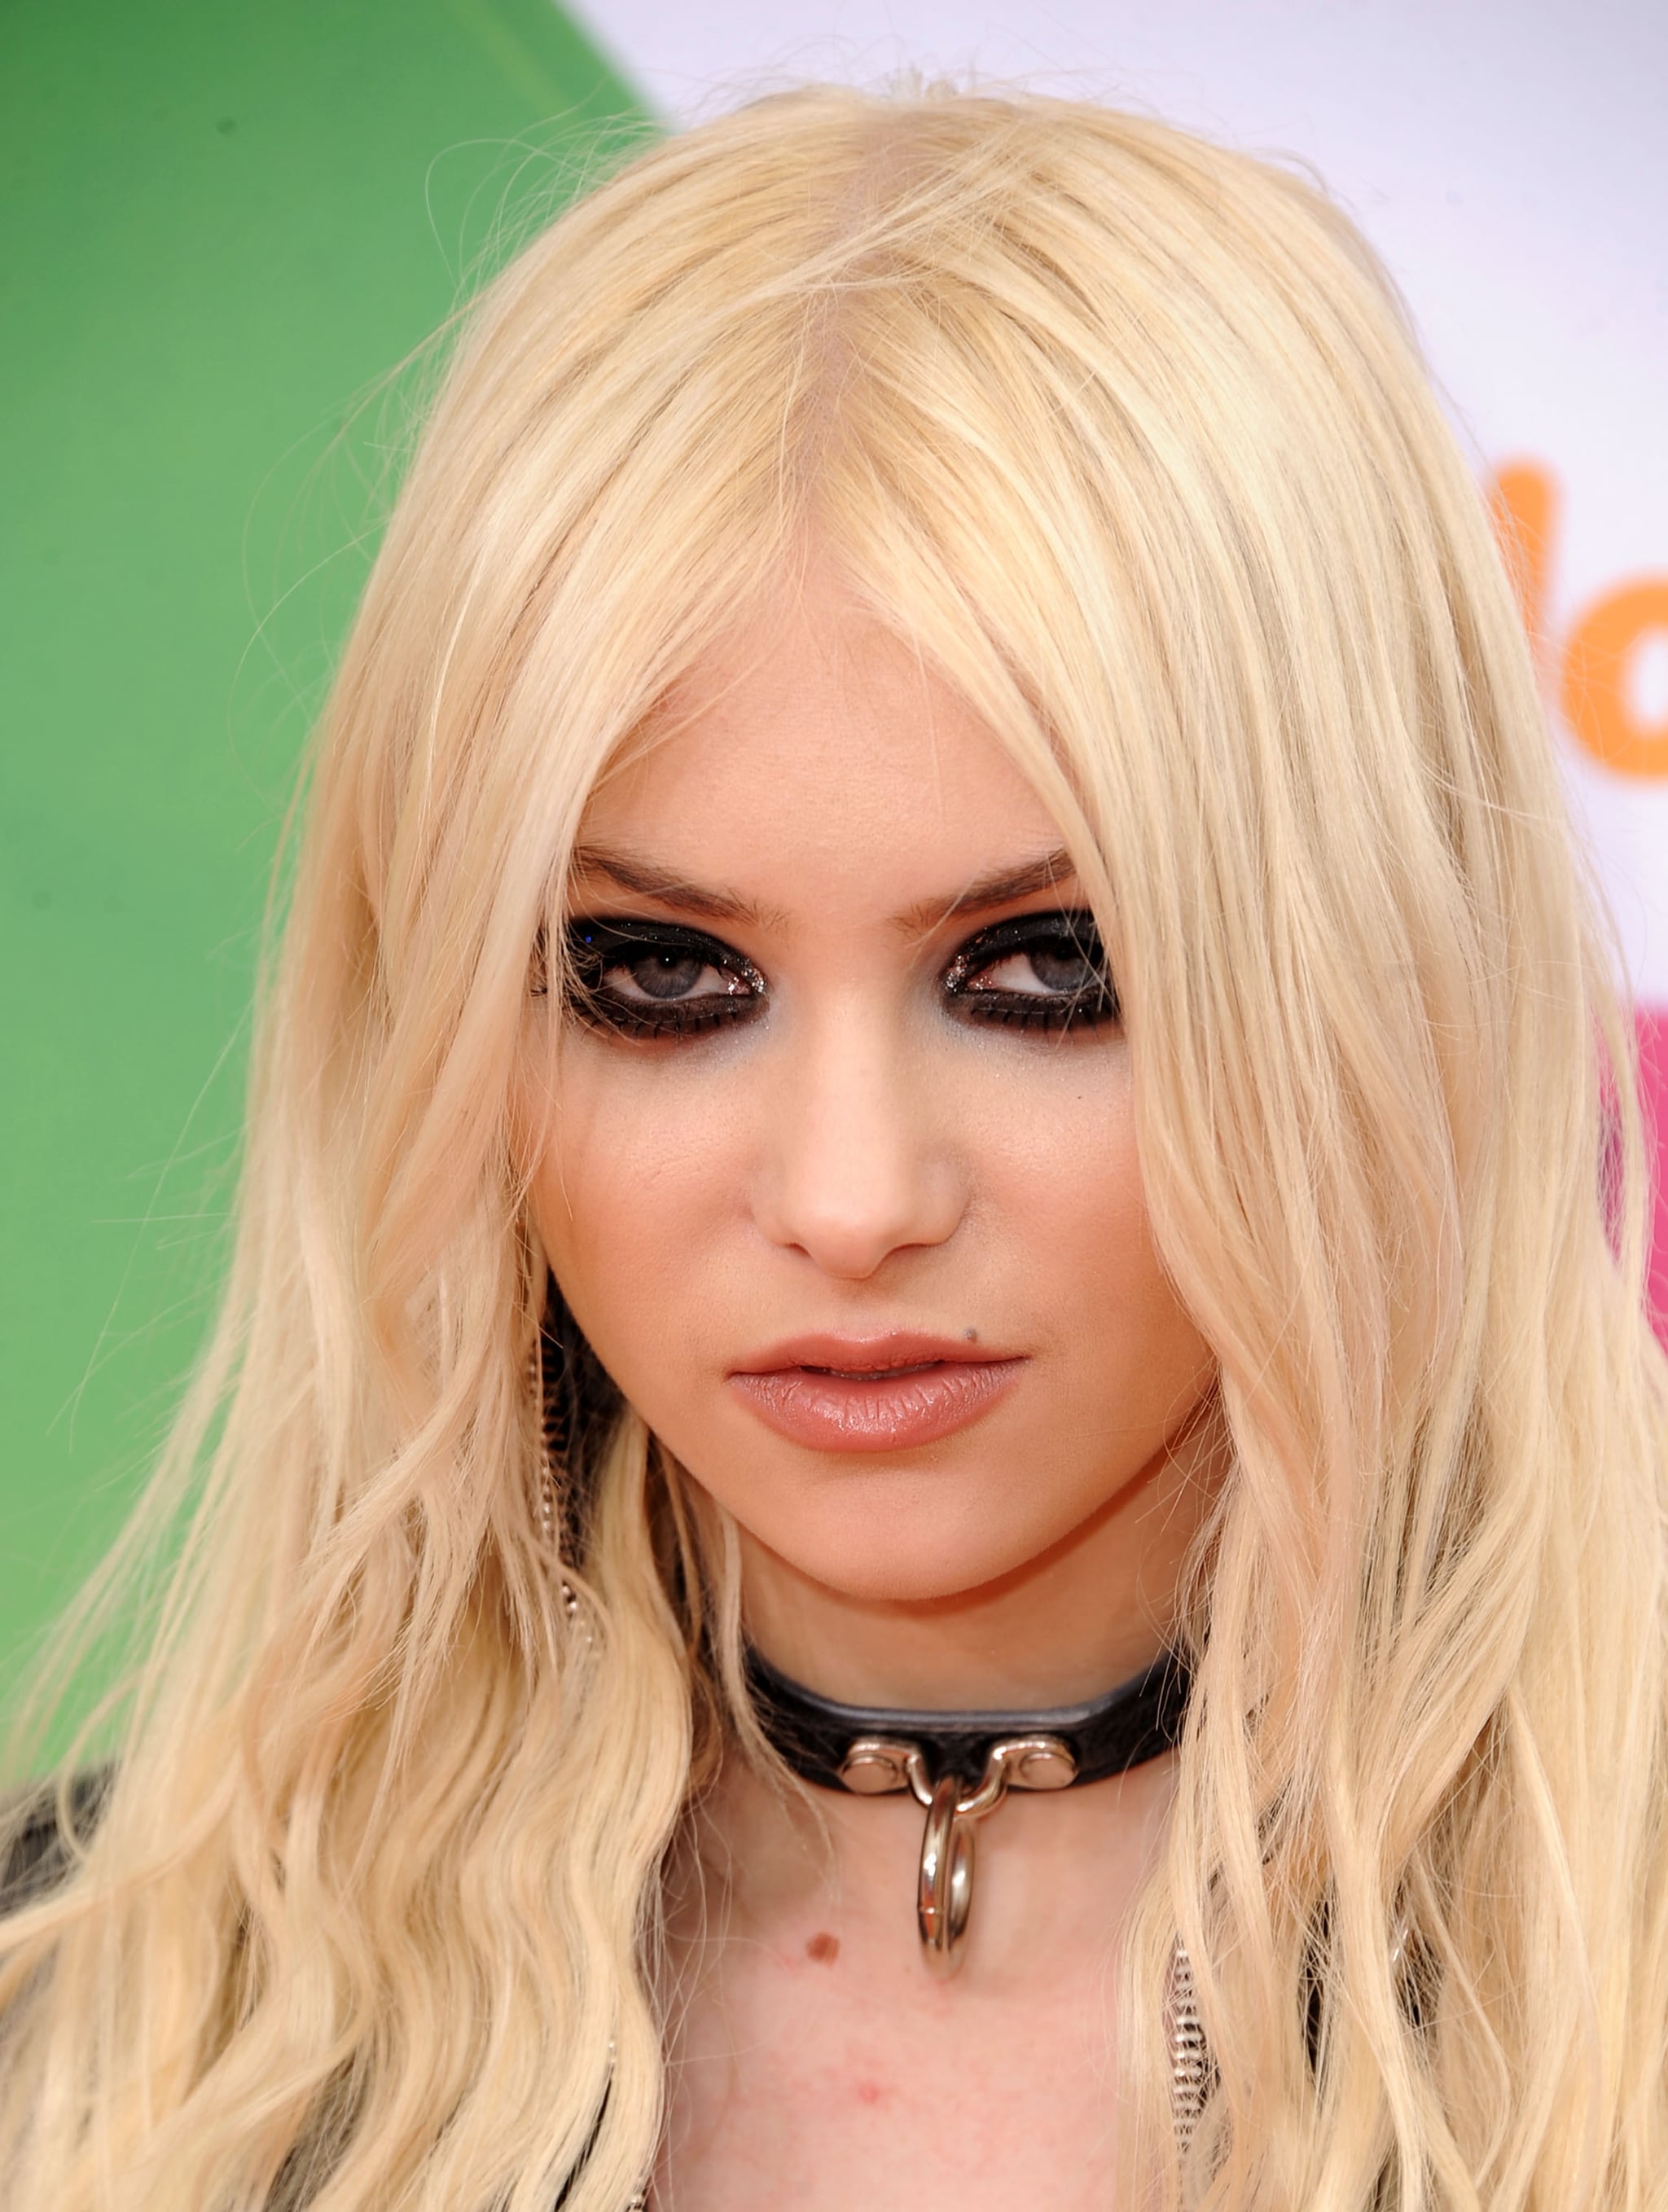 Actress/musician Taylor Momsen arrives at Nickelodeon's 24th Annual Kids' Choice Awards at Galen Center on April 2, 2011 in Los Angeles, California.